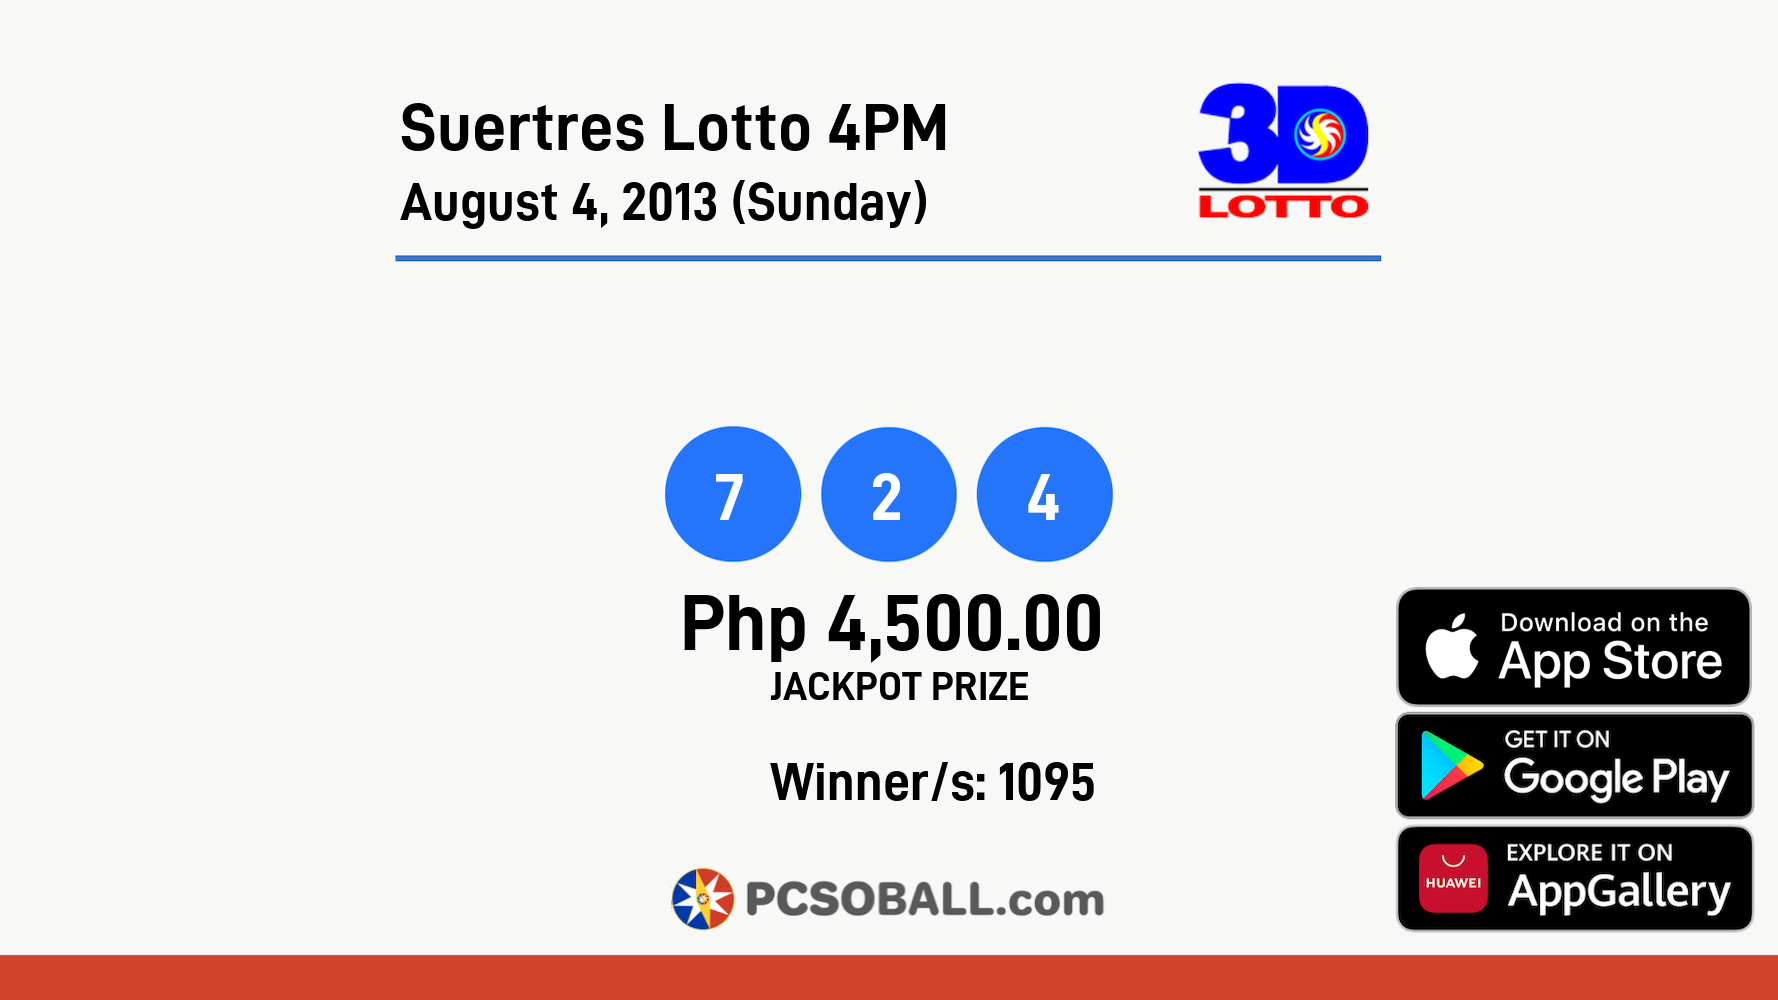 Suertres Lotto 4PM August 4, 2013 (Sunday) Result